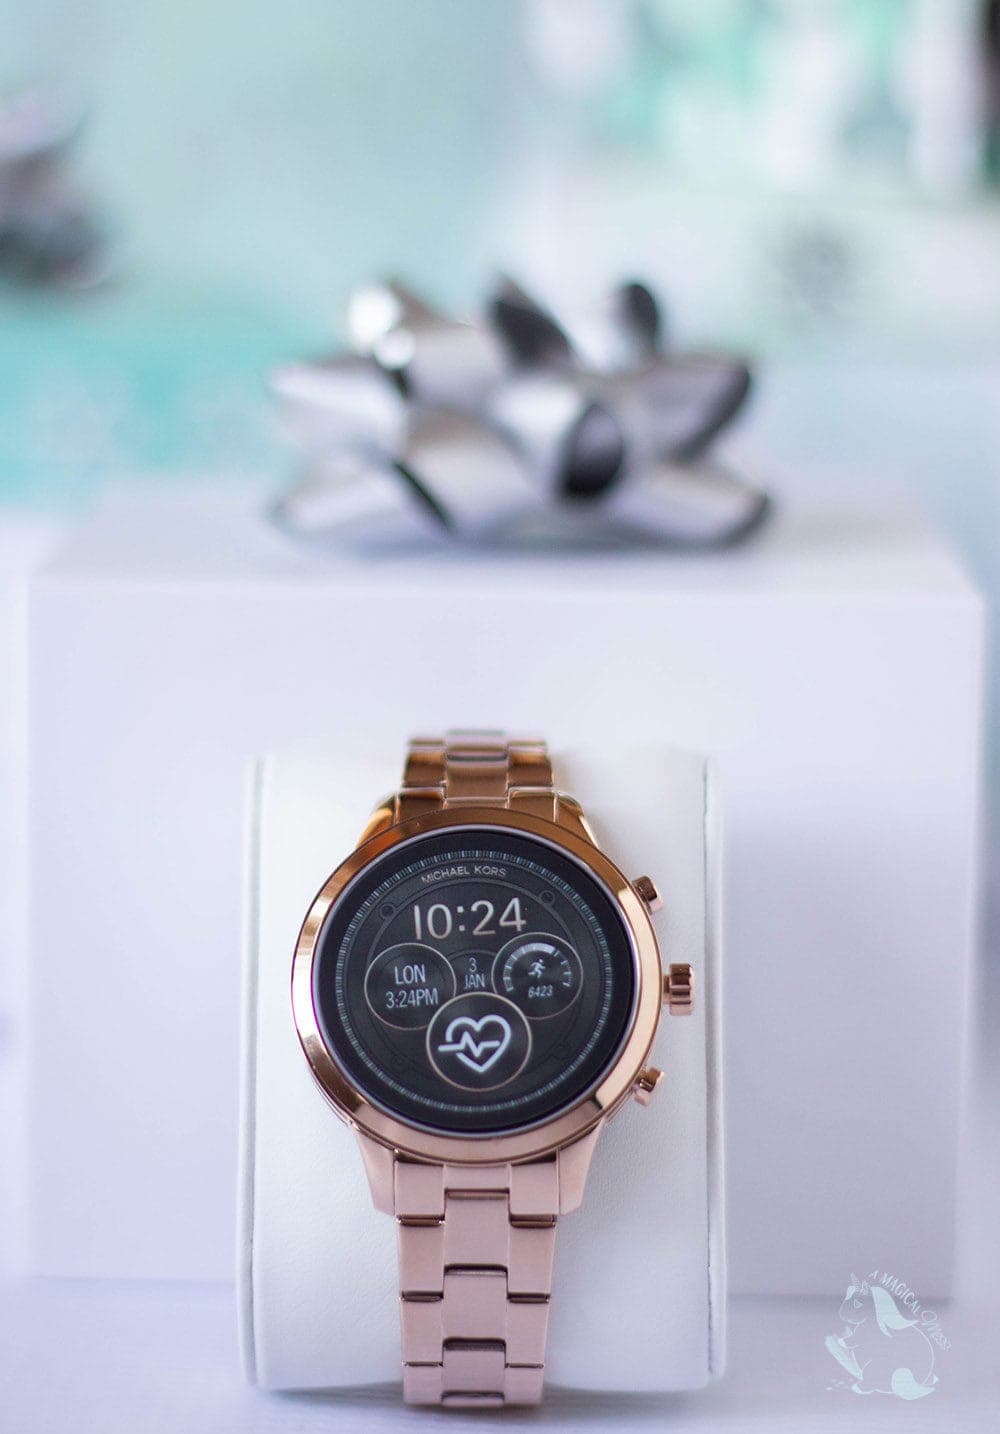 Michael Kors Access Runway Smartwatch out of the box